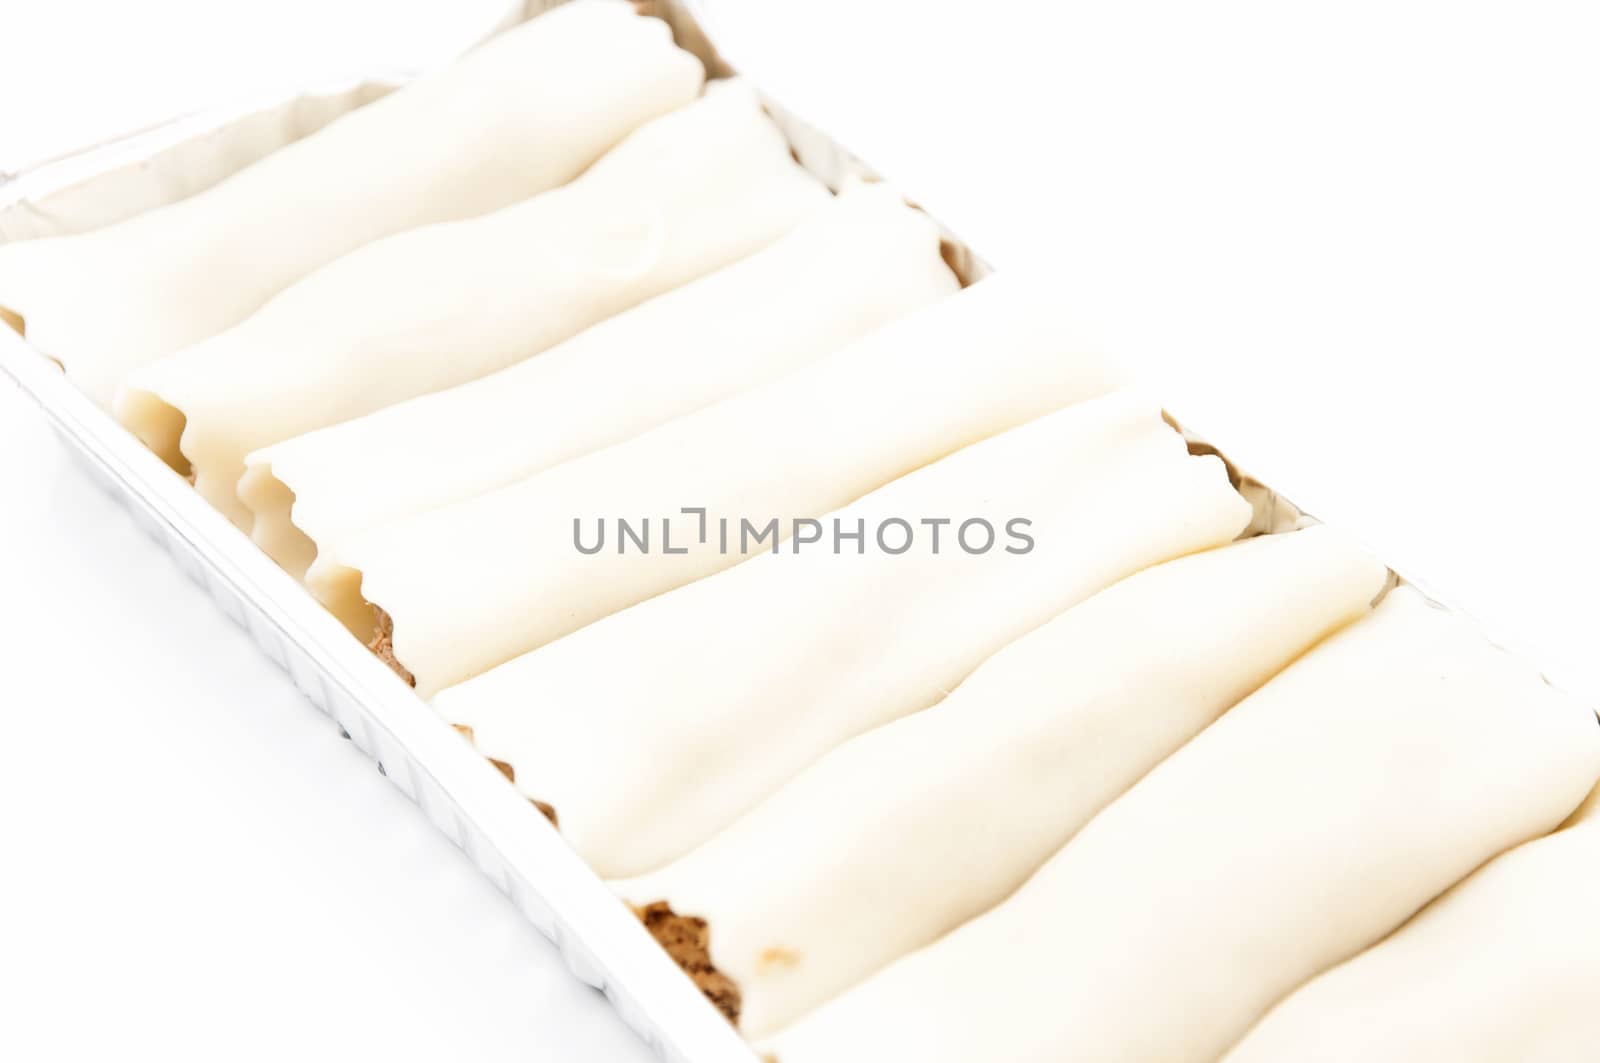 cannelloni in tray on a white background